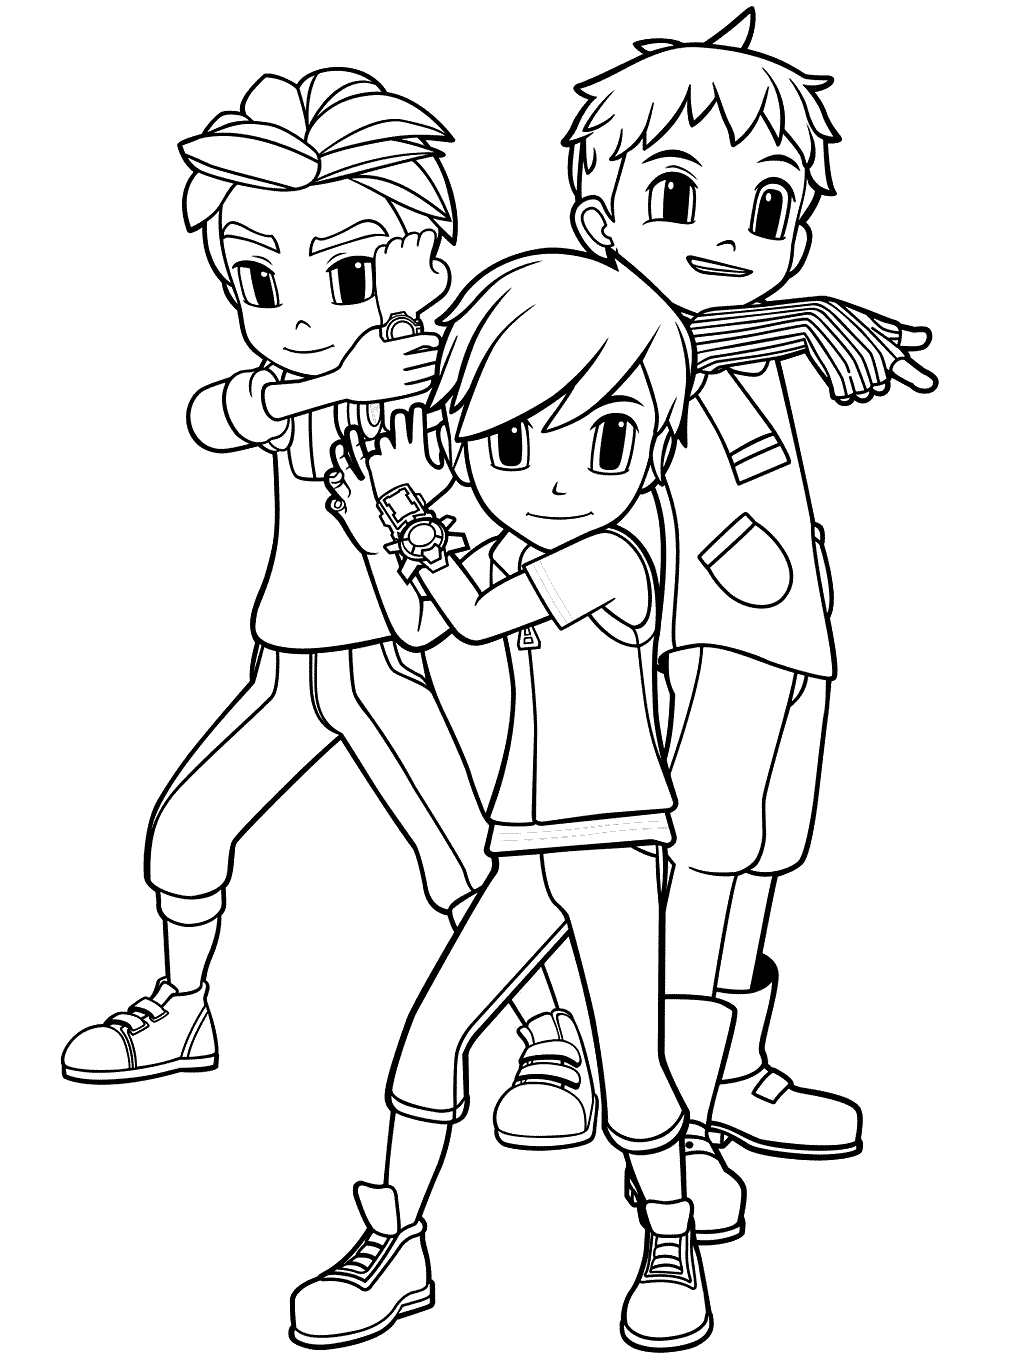 Dylan with Ryan and Kory Coloring Pages